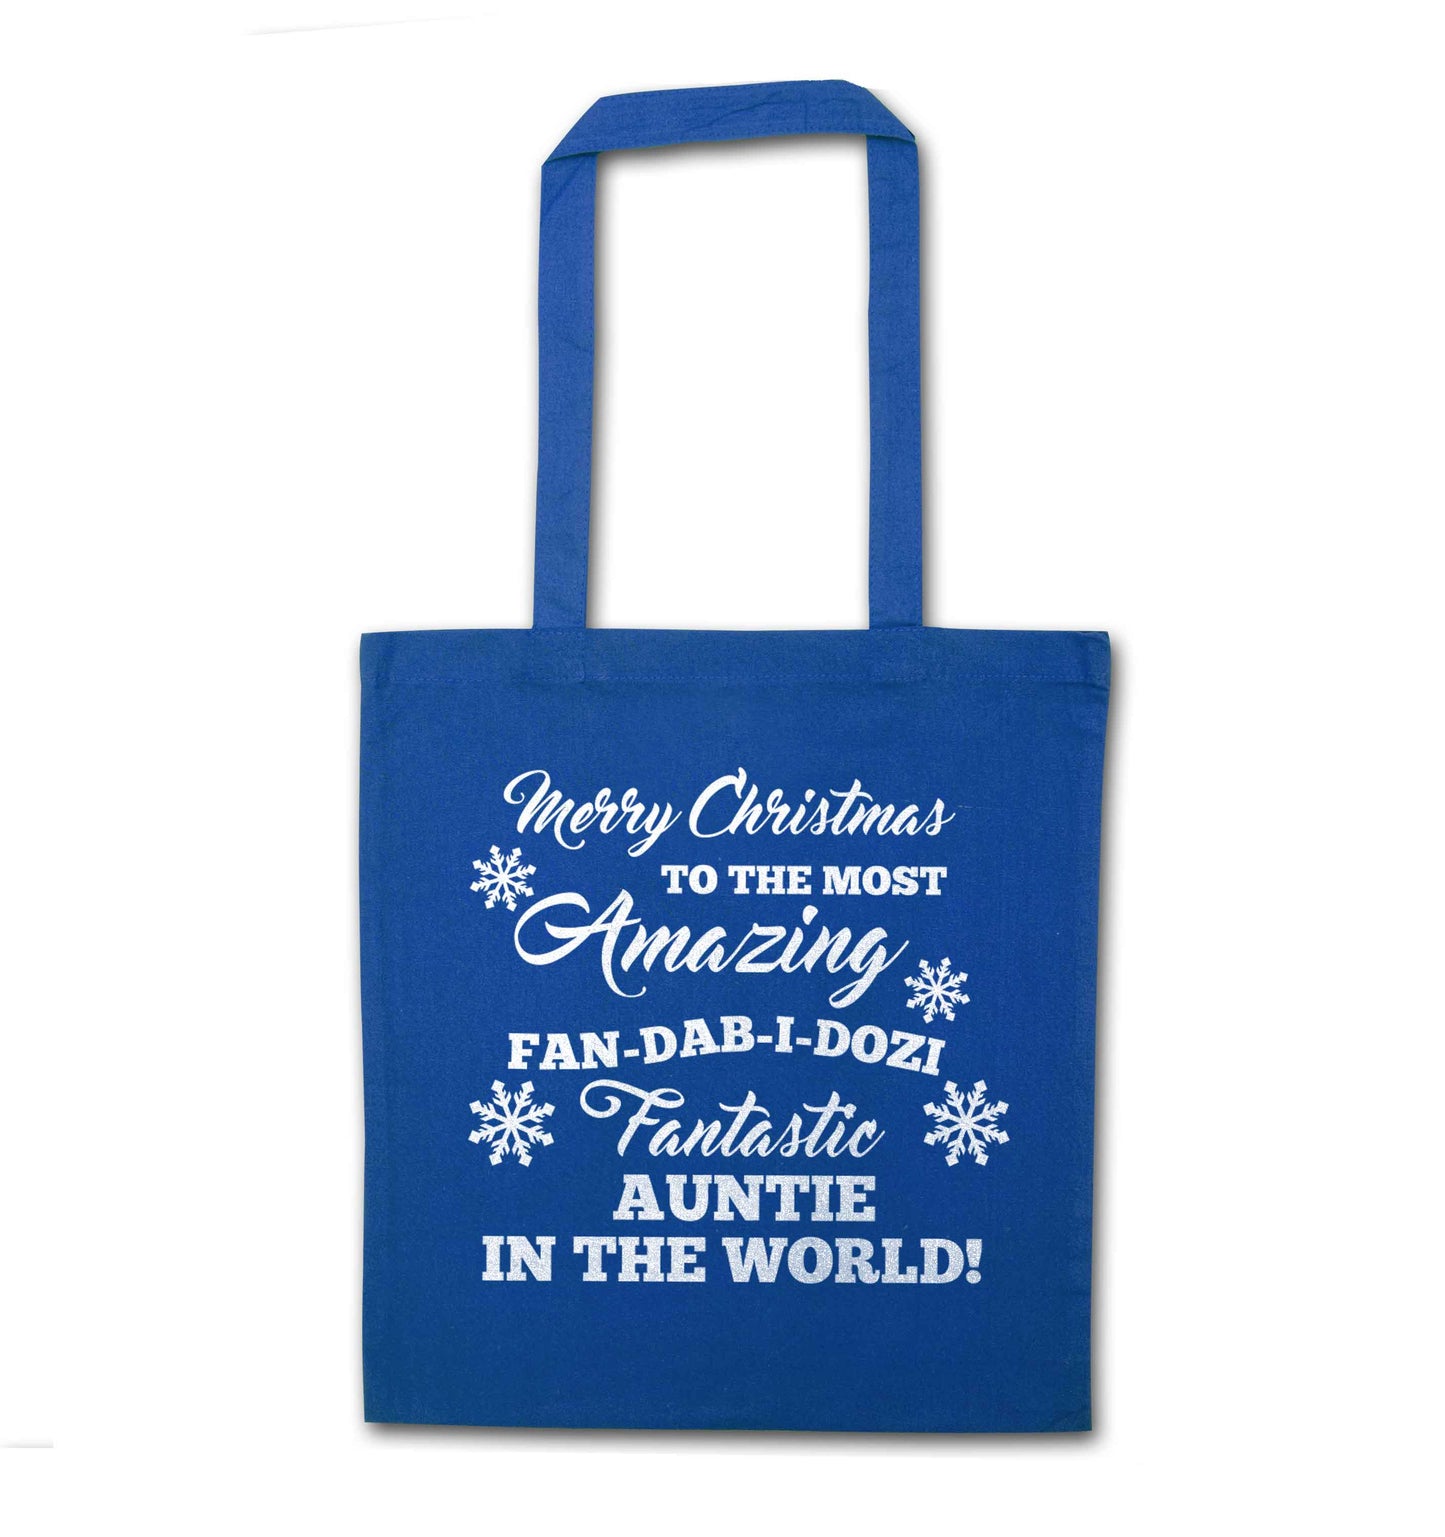 Merry Christmas to the most amazing fan-dab-i-dozi fantasic Auntie in the world blue tote bag